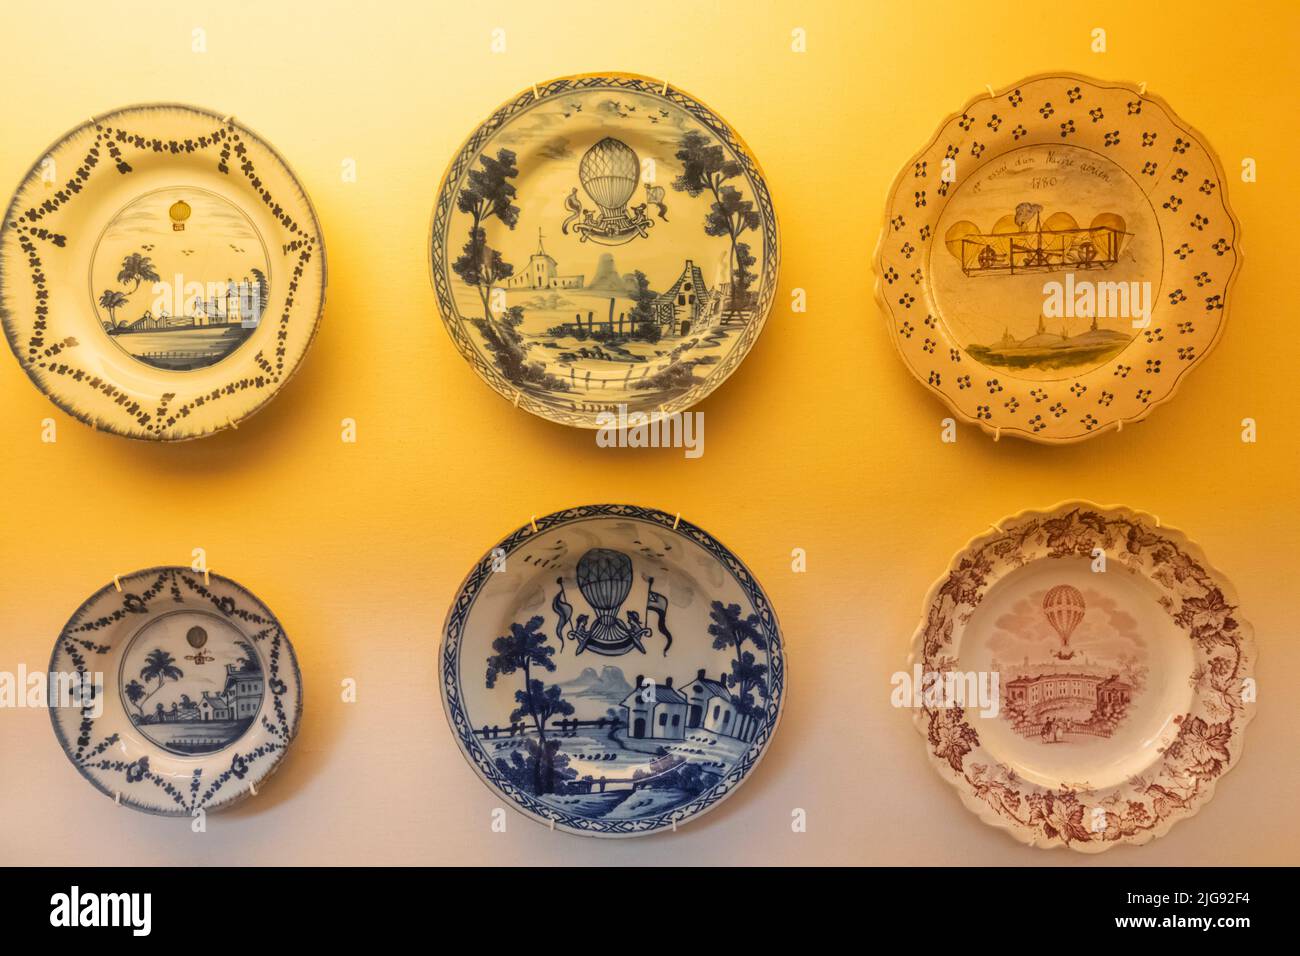 England, London, South Kensington, Science Museum, Display of Plates Commemorating the Early Days of Hot Air Ballooning Stock Photo